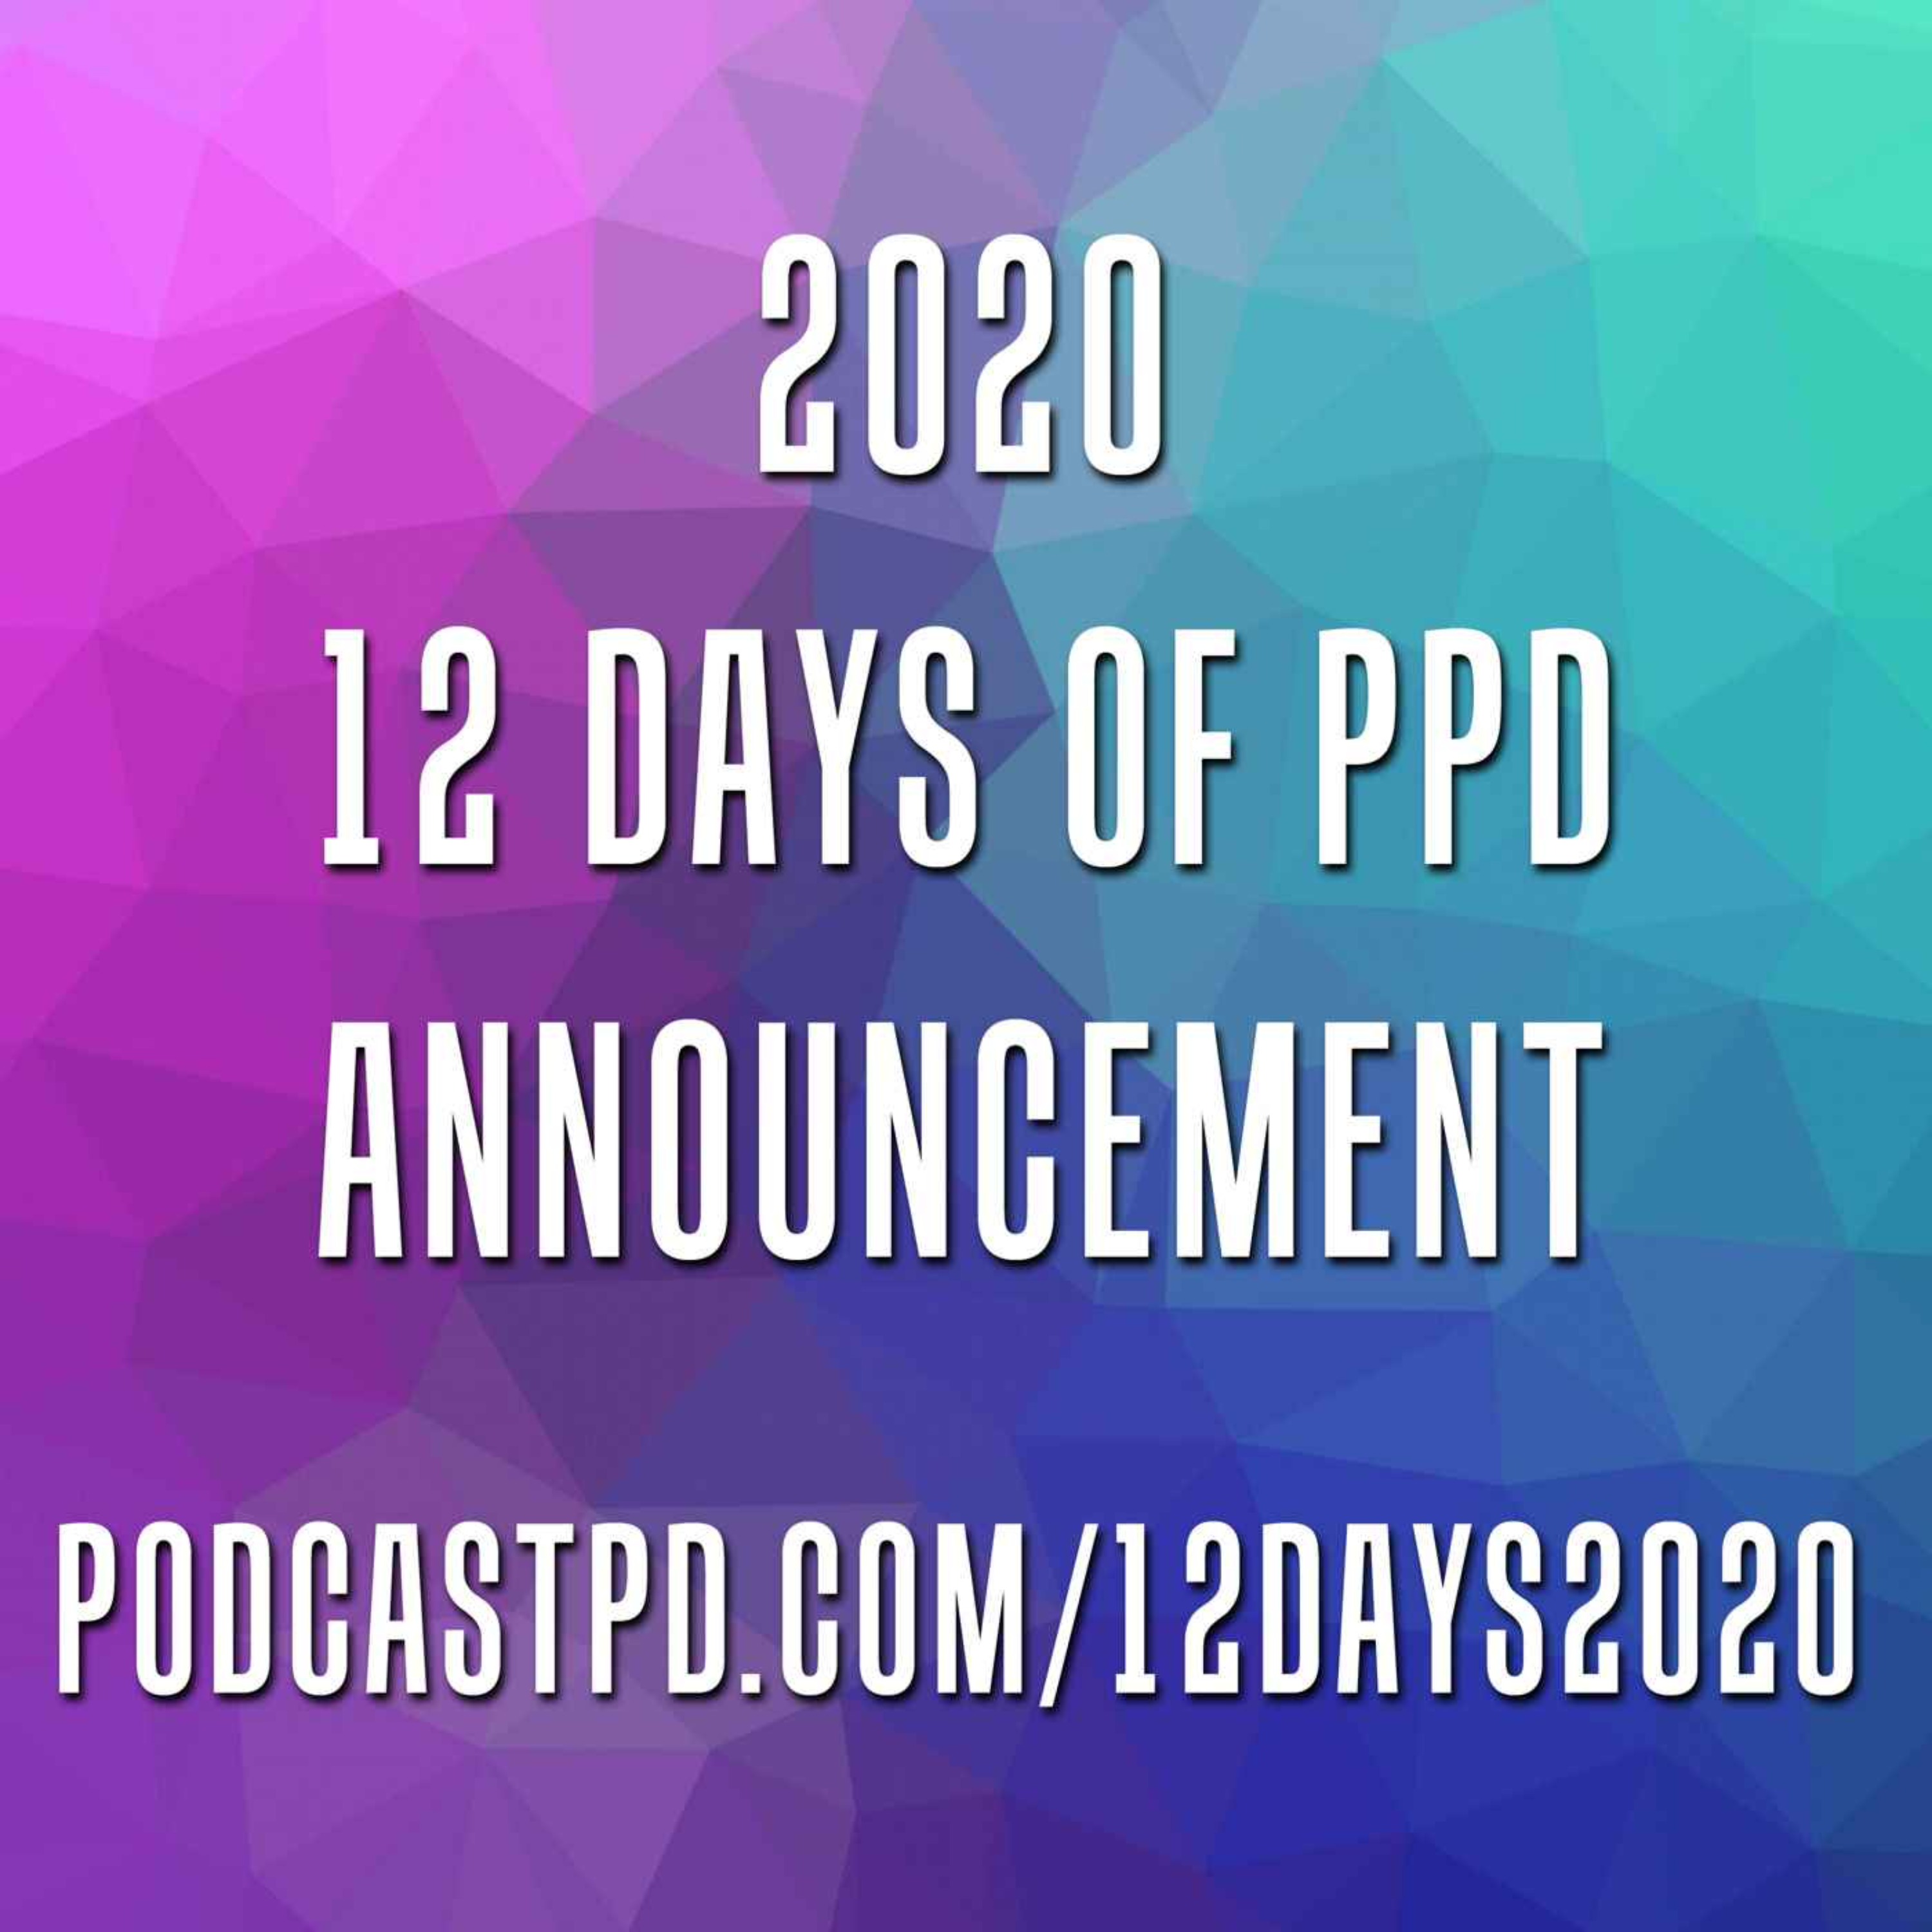 12 Days of PodcastPD 2020 Announcement Image